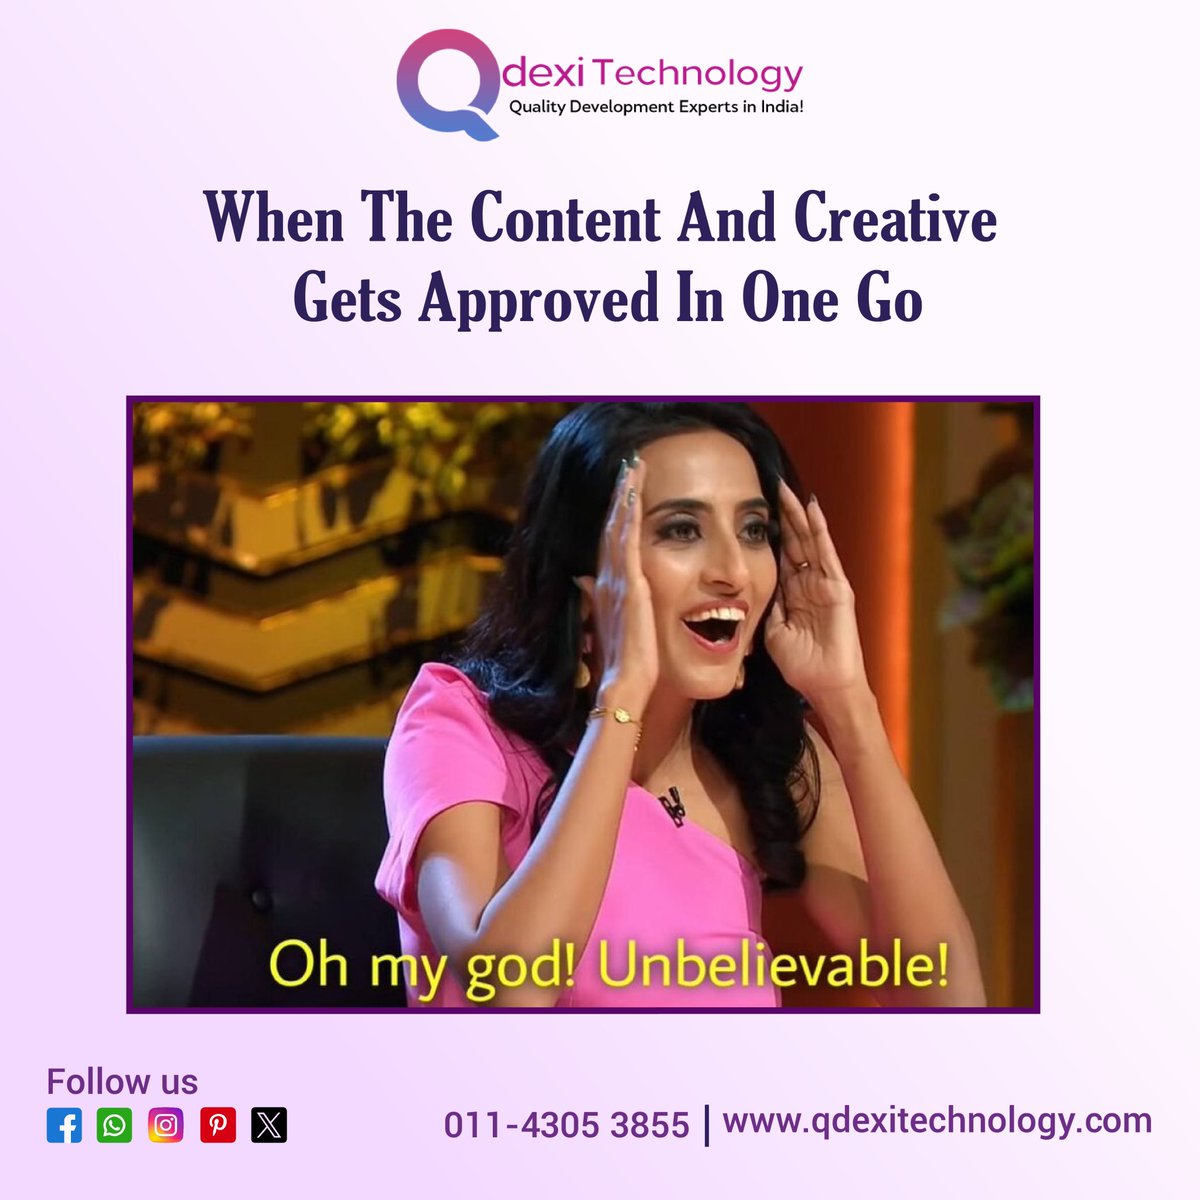 Quality development experts in India excel when content and creativity are approved effortlessly. Amazing! Qdexi Technology: Quality Solutions, Innovative Approach.

#QualityDevelopment #ExpertsIndia #ContentApproval #CreativeSuccess